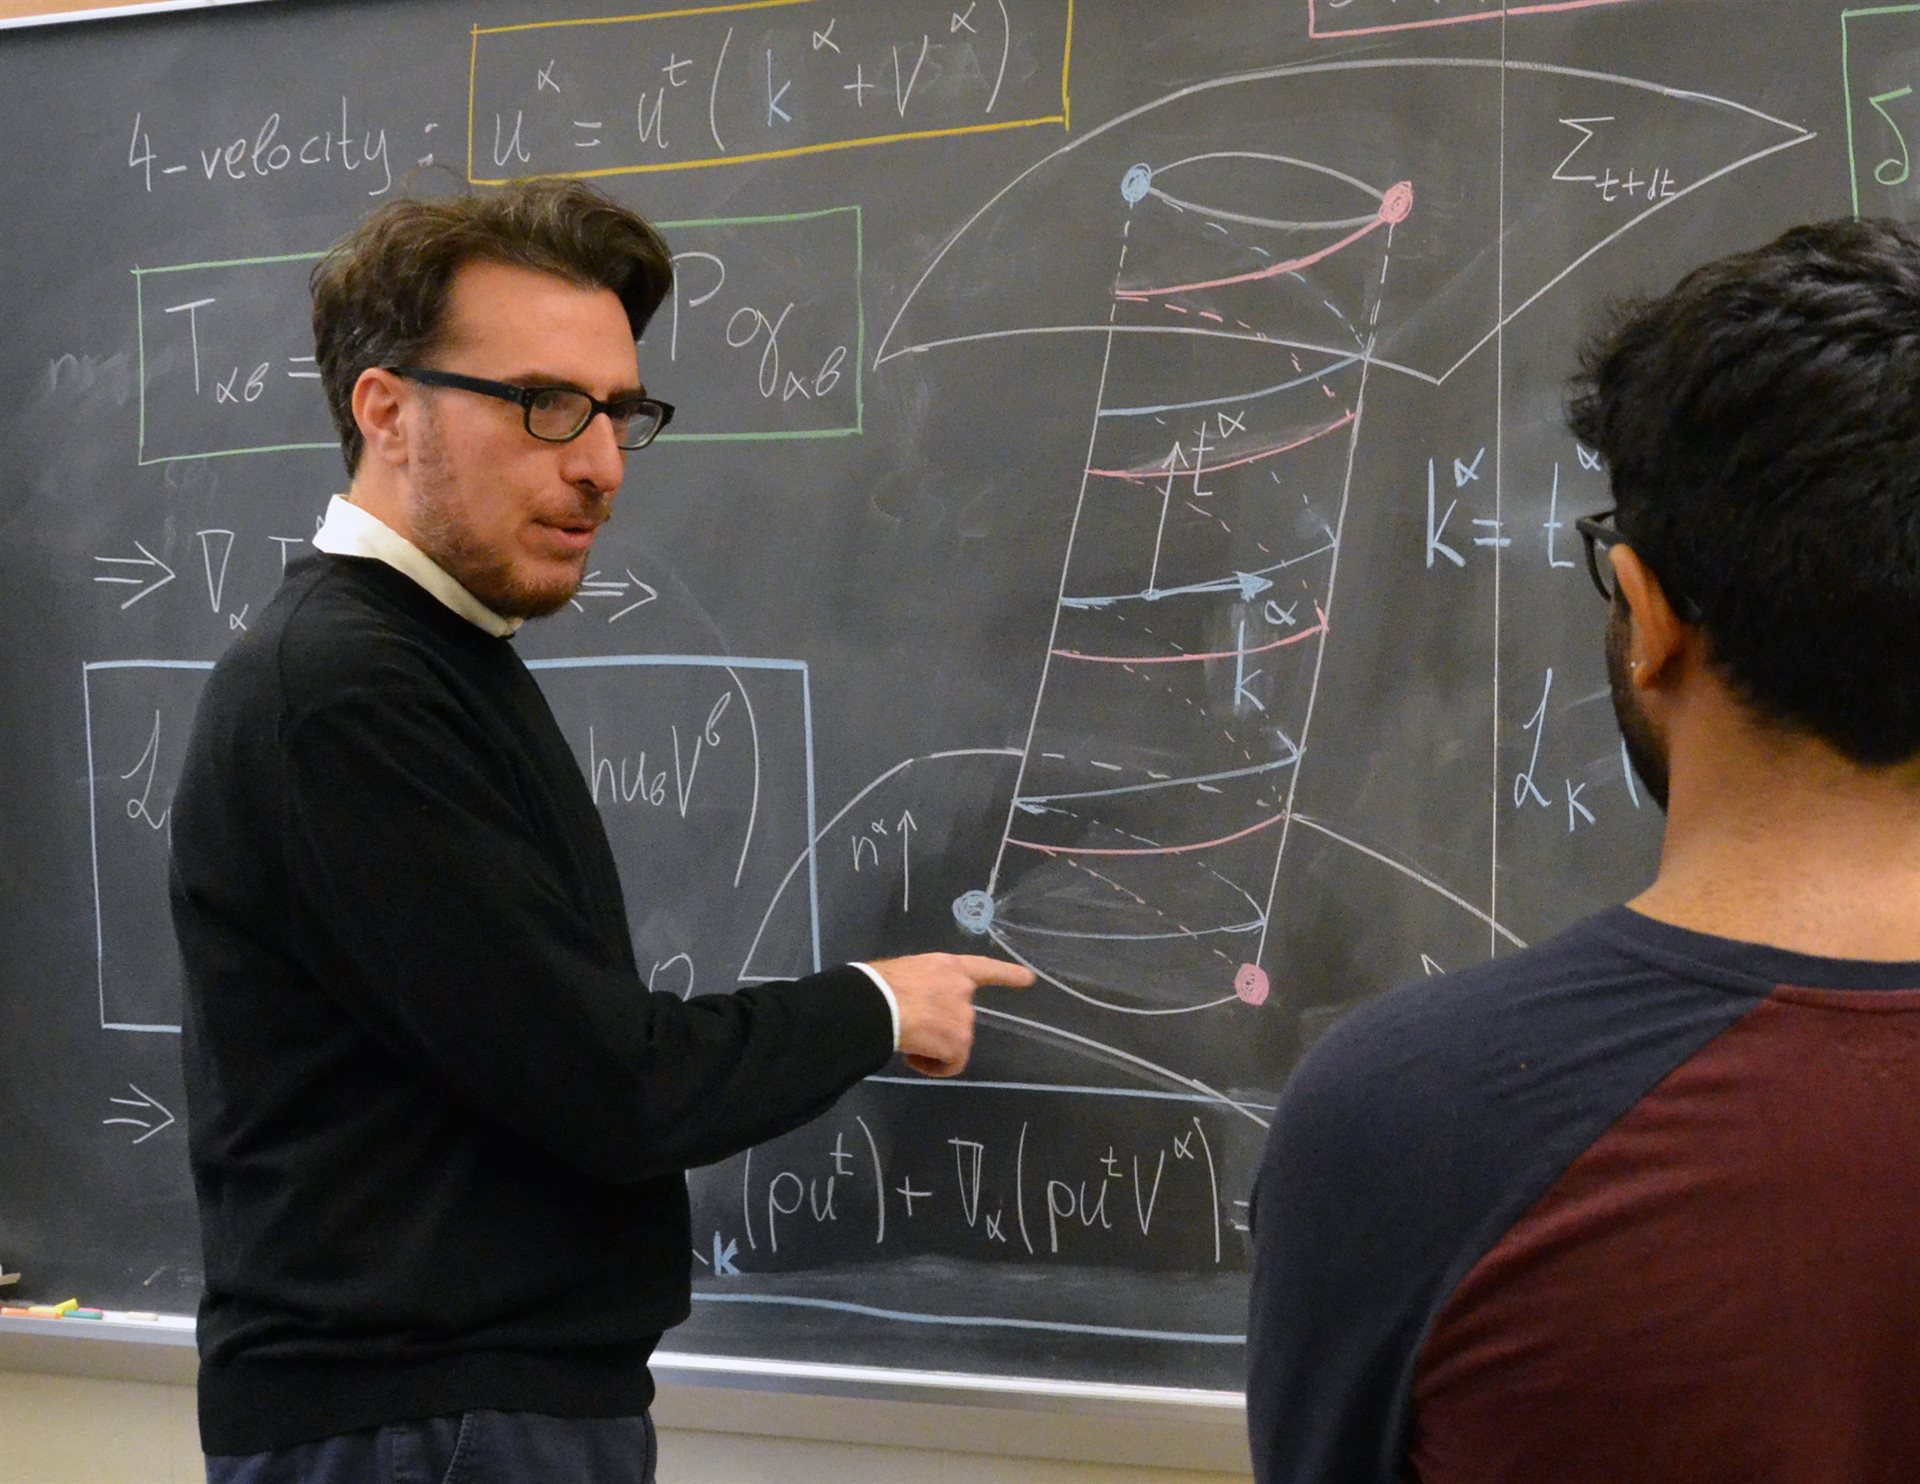 Research Professor Antonios Tsokaros (left) meets with an undergraduate student at Loomis Laboratory of Physics. Photo by Siv Schwink for Illinois Physics